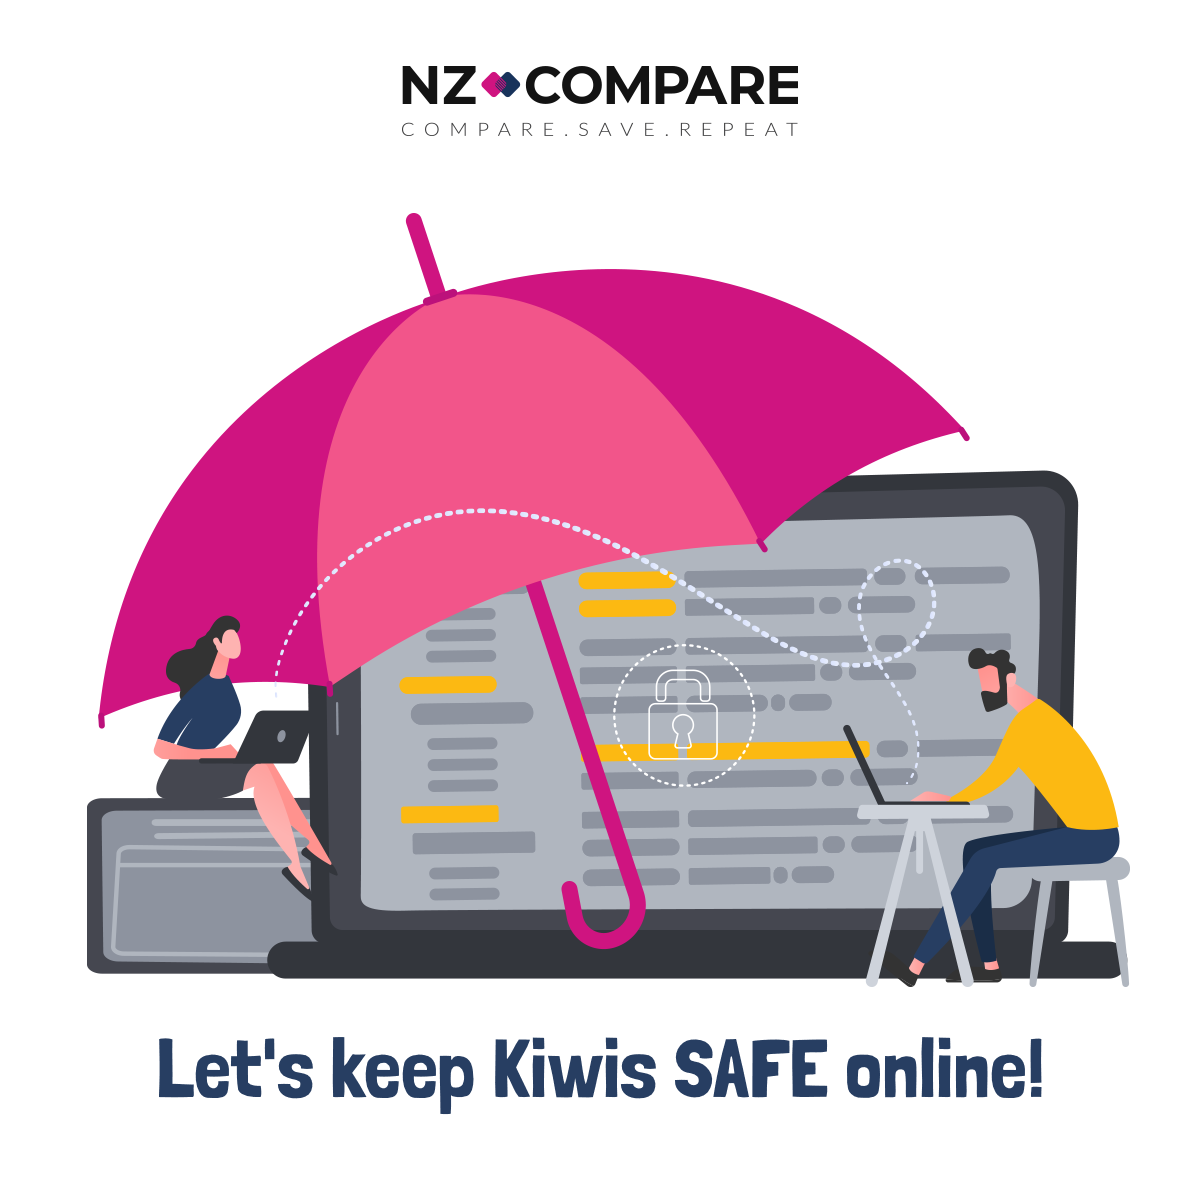 Get netsafe and compare your broadband plans with broadband compare